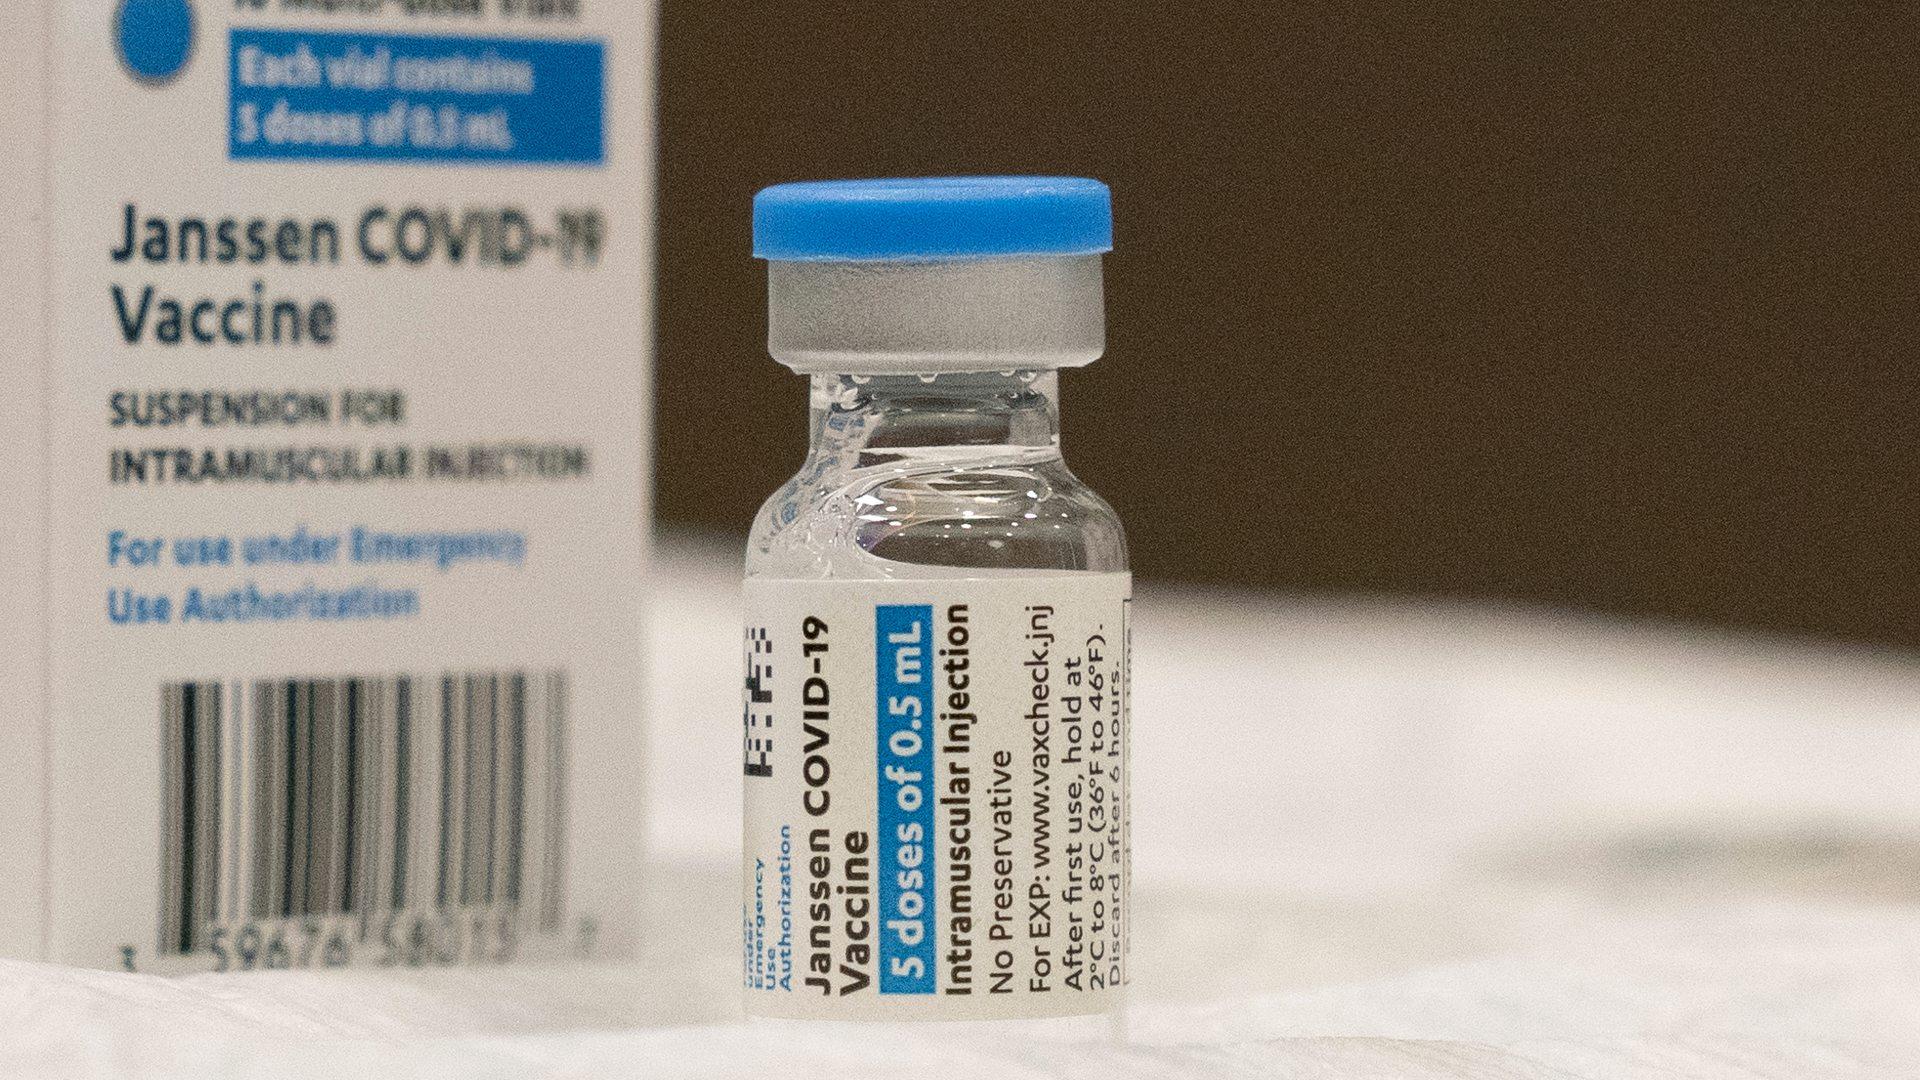 In this March 3, 2021 file photo, a vial of the Johnson & Johnson COVID-19 vaccine is displayed at South Shore University Hospital in Bay Shore, N.Y. (AP Photo / Mark Lennihan, File)